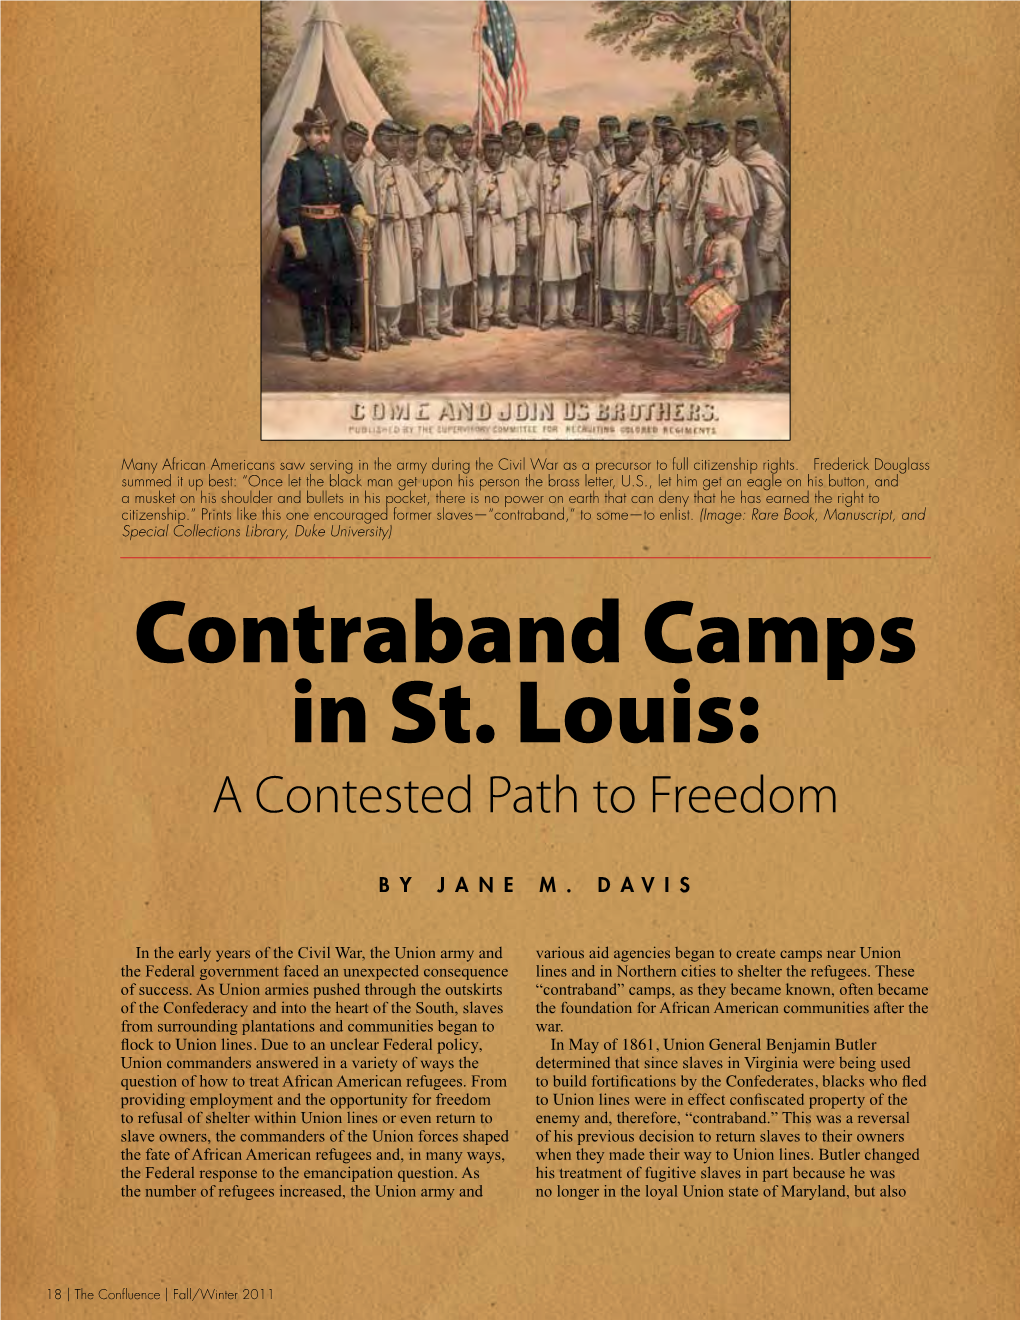 Contraband Camps in St. Louis: a Contested Path to Freedom